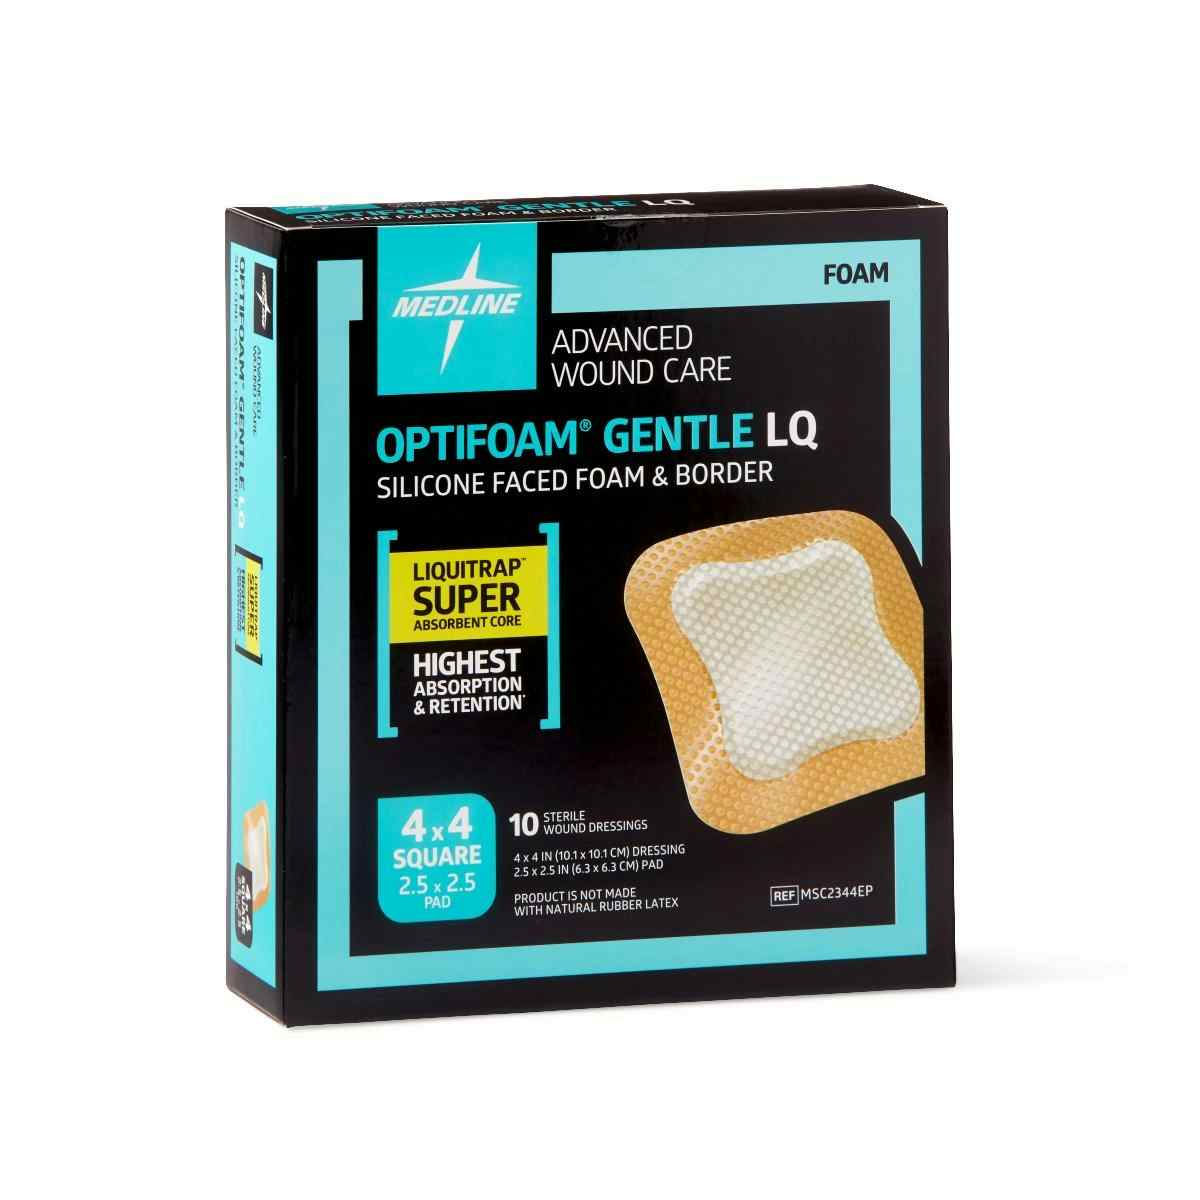 Optifoam Gentle LQ Silicone-Faced Foam Dressing with Liquitrap, MSC2344EPZ, 4 X 4 Inches - Box of 10